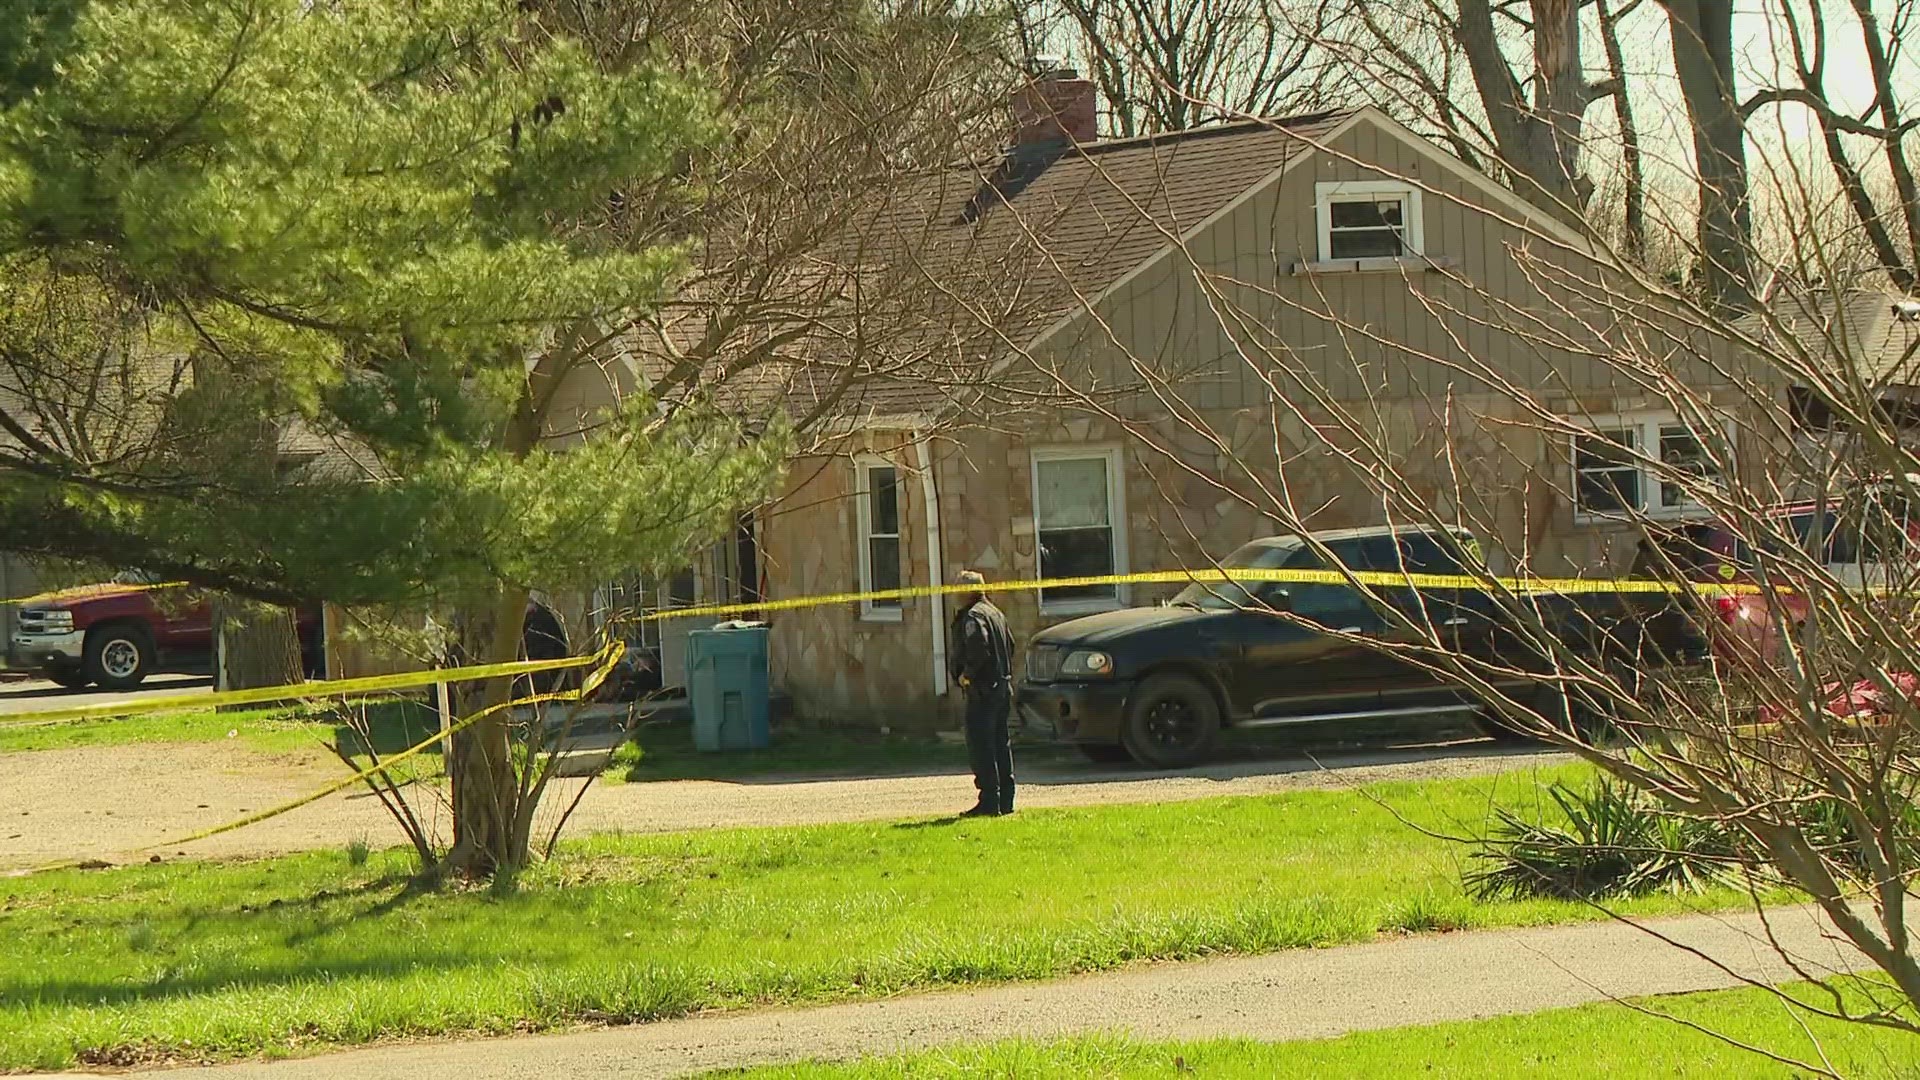 The shooting was reported around 11:15 a.m. March 20 in the 6400 block of Rockville Road, near North High School Road.